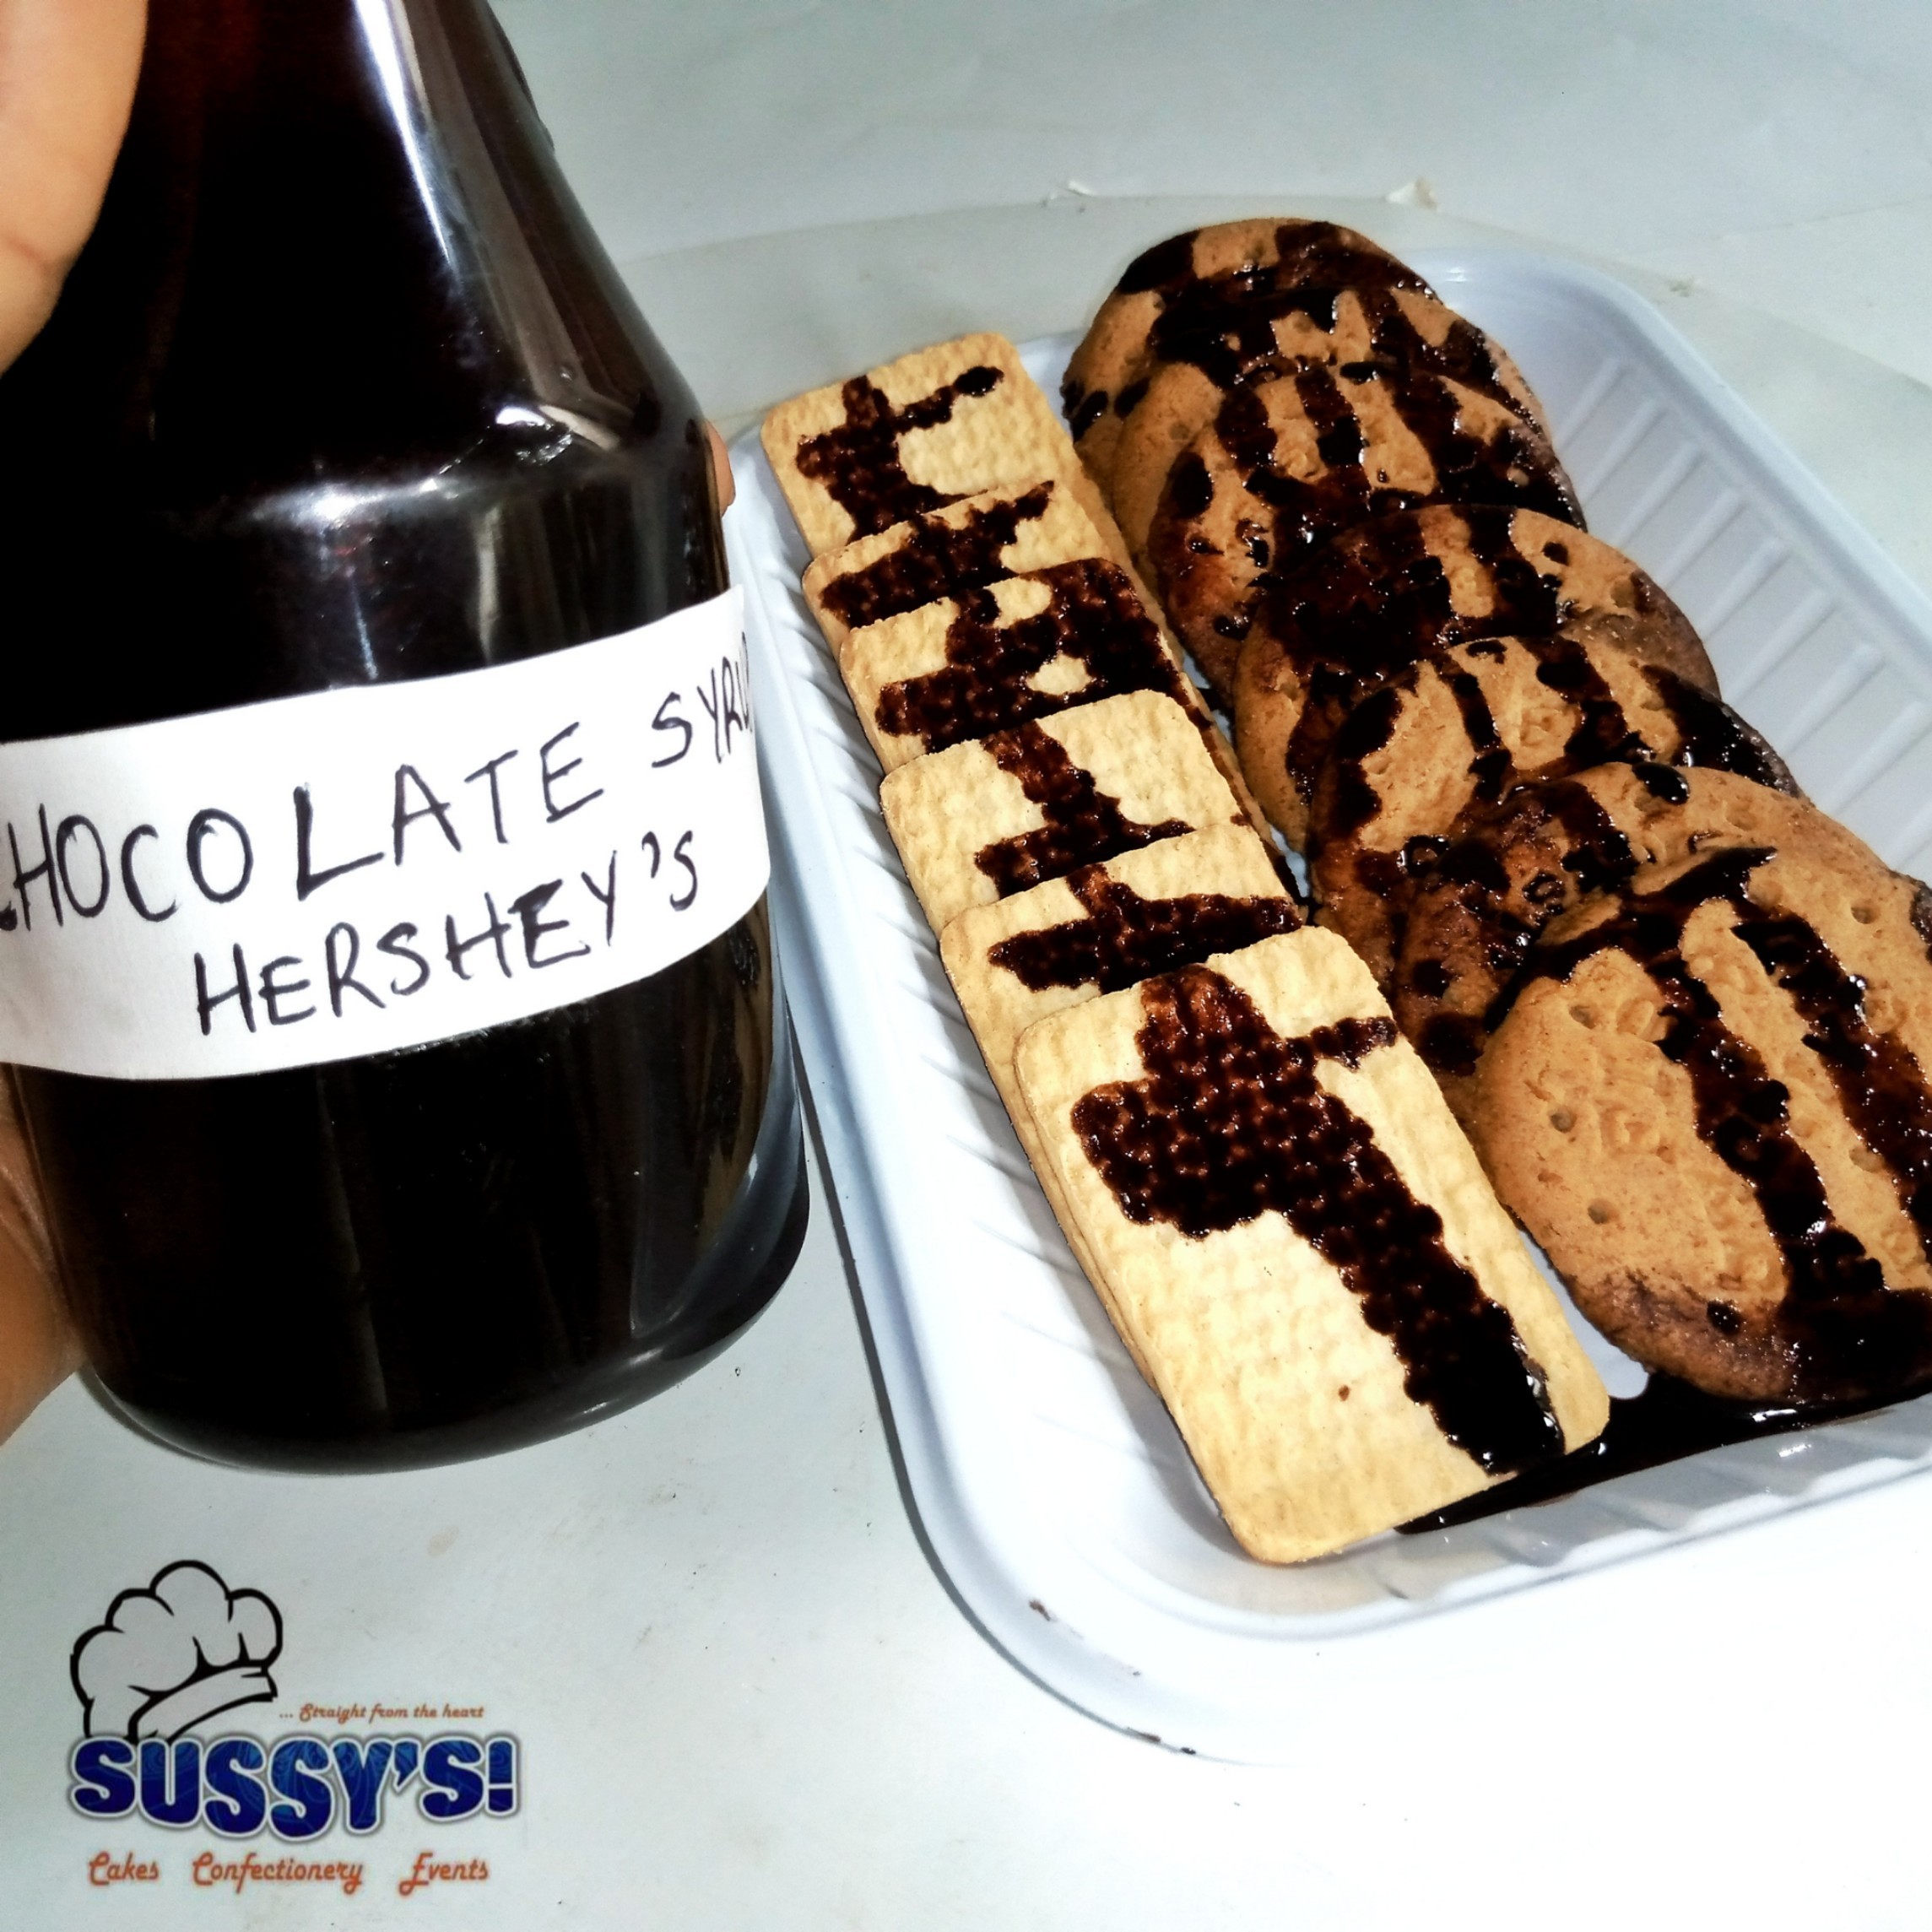 CHOCOLATE SYRUP IN 10 MINUTES | Hershey’s Chocolate Syrup